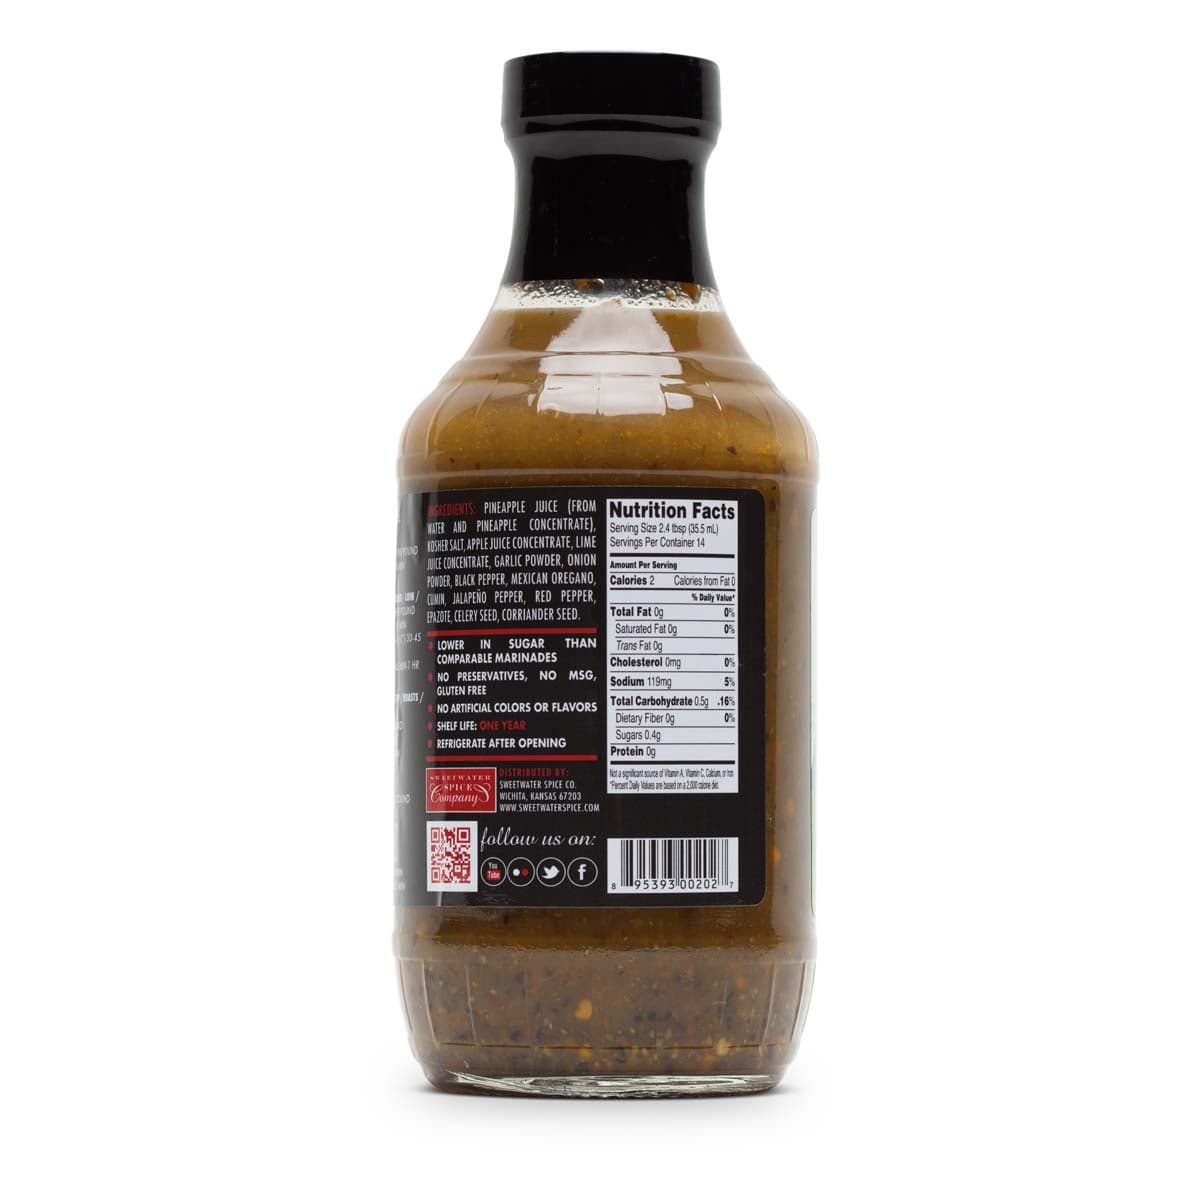 Sweetwater Spice Lime Jalapeno Fajita Bath Brine Concentrate Marinades & Grilling Sauces 12020910